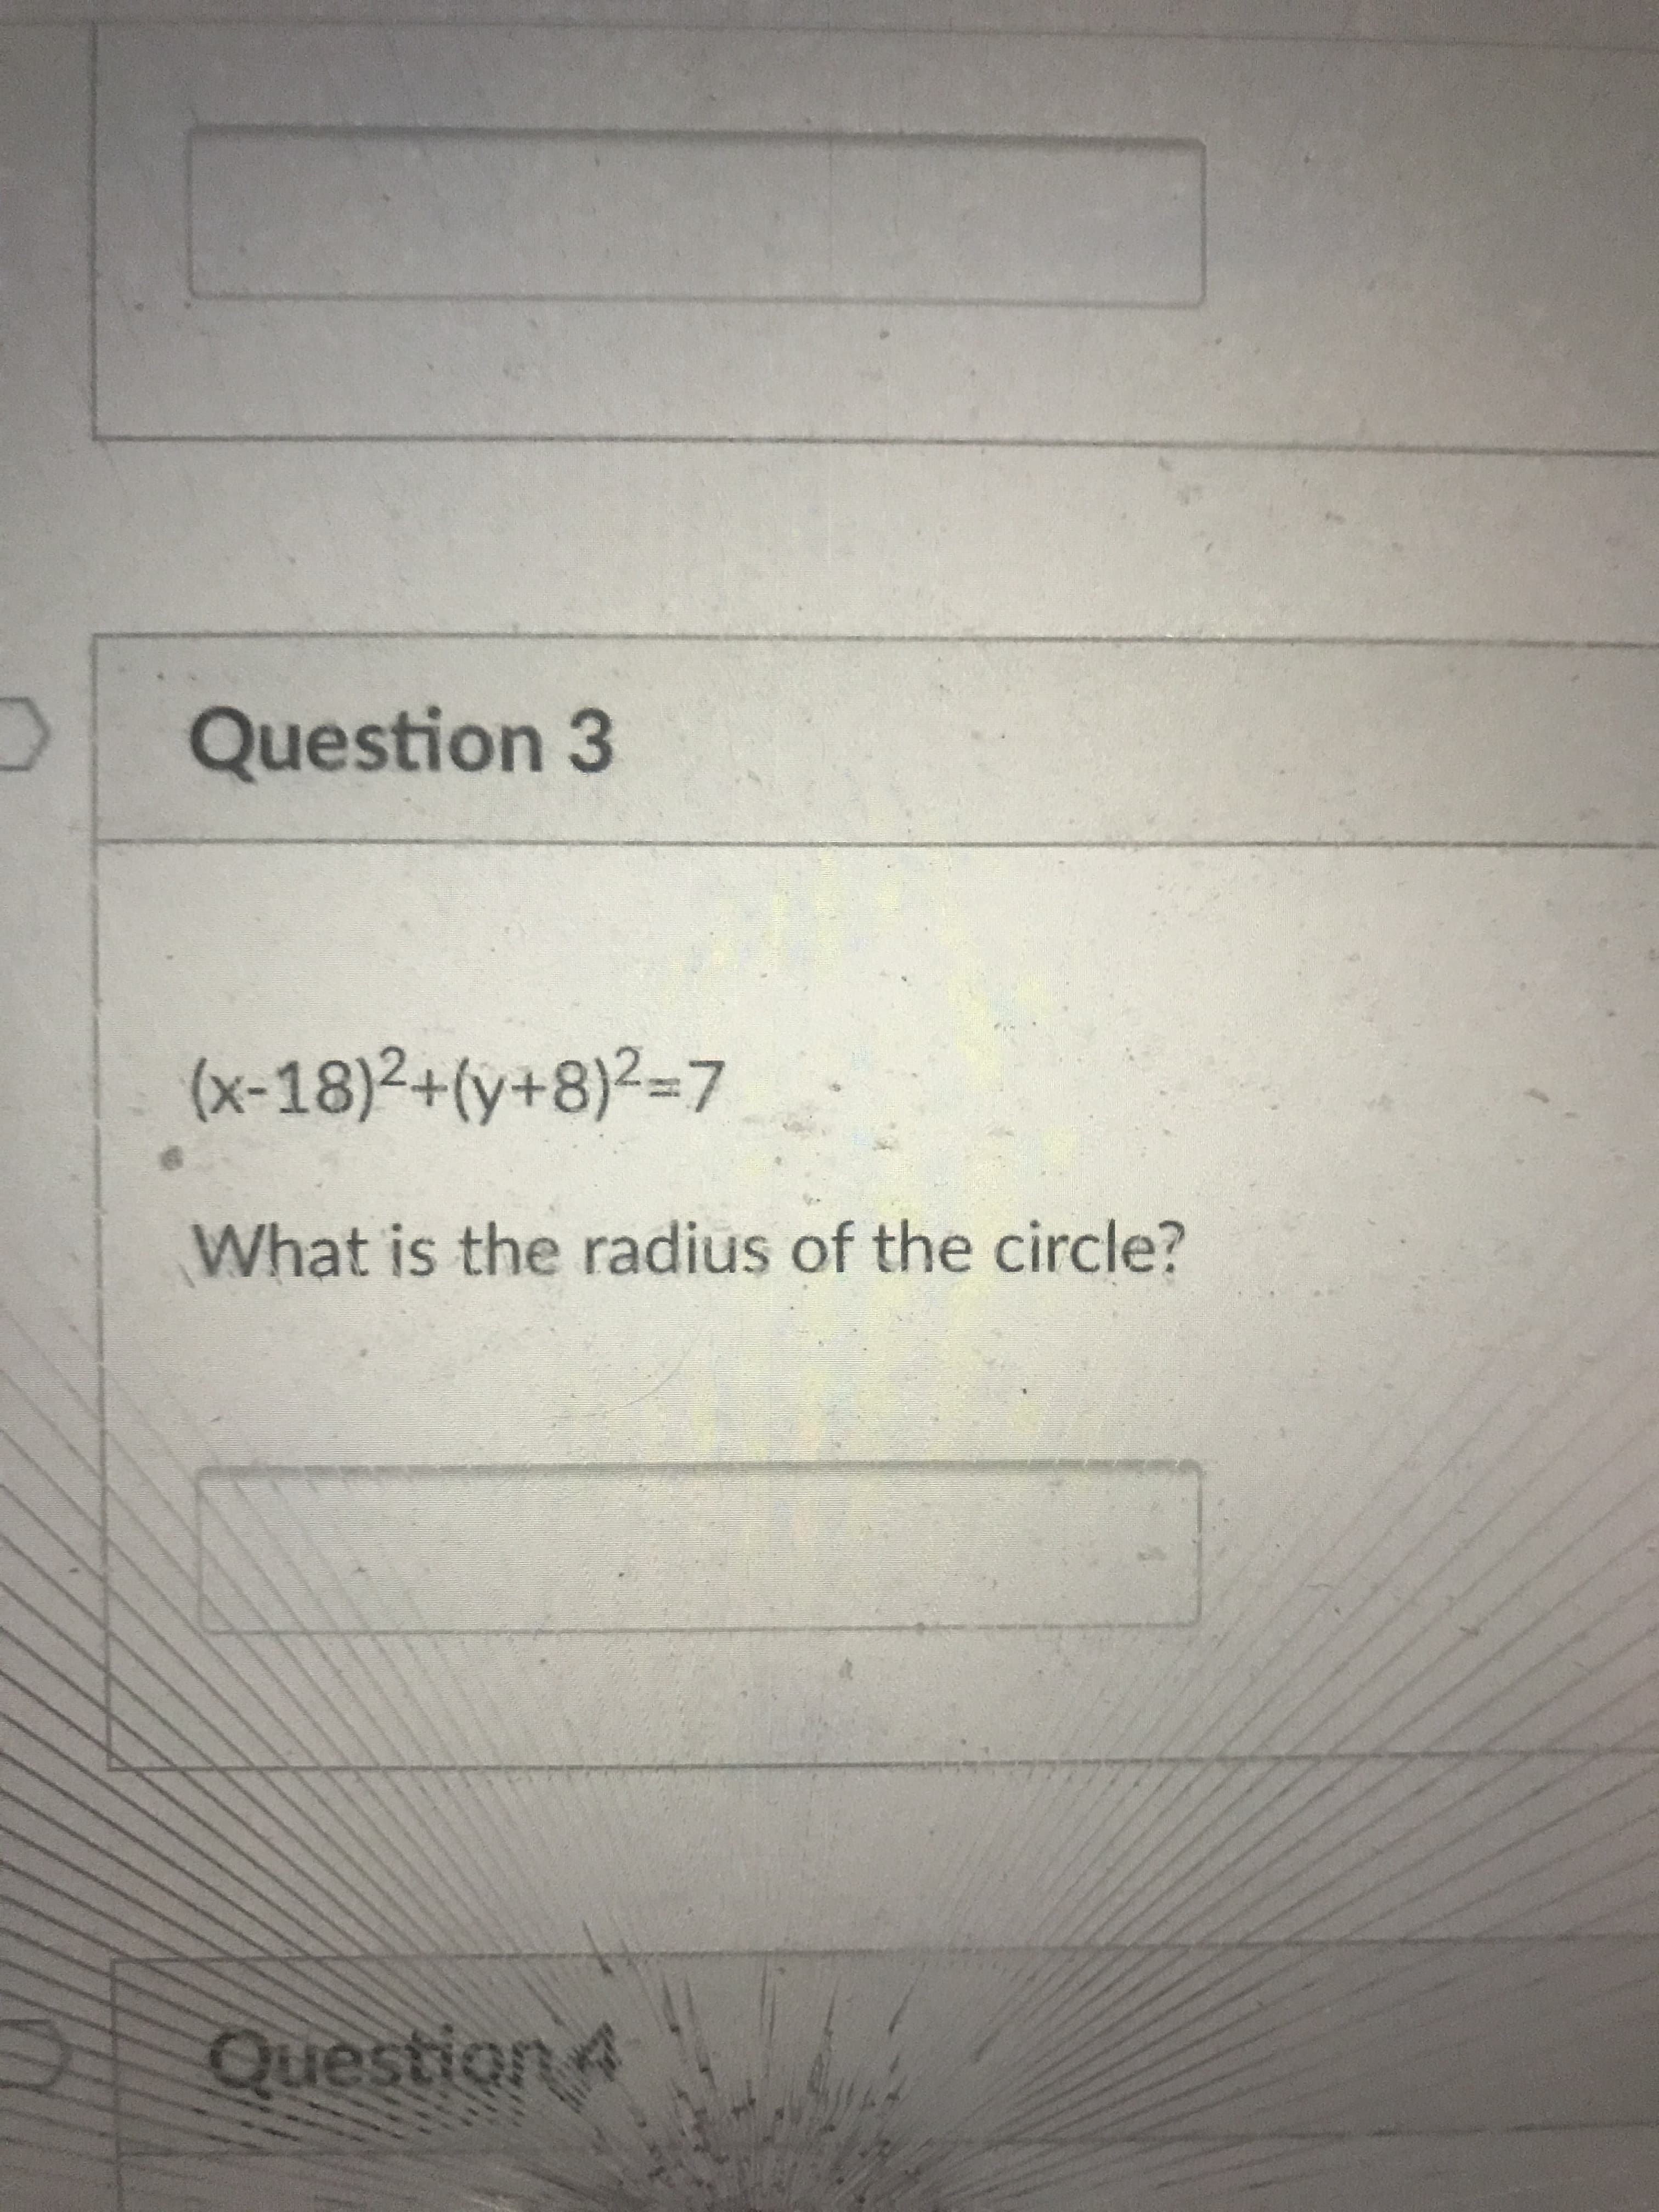 (x-18)2+(y+8)²=7
What is the radius of the circle?
